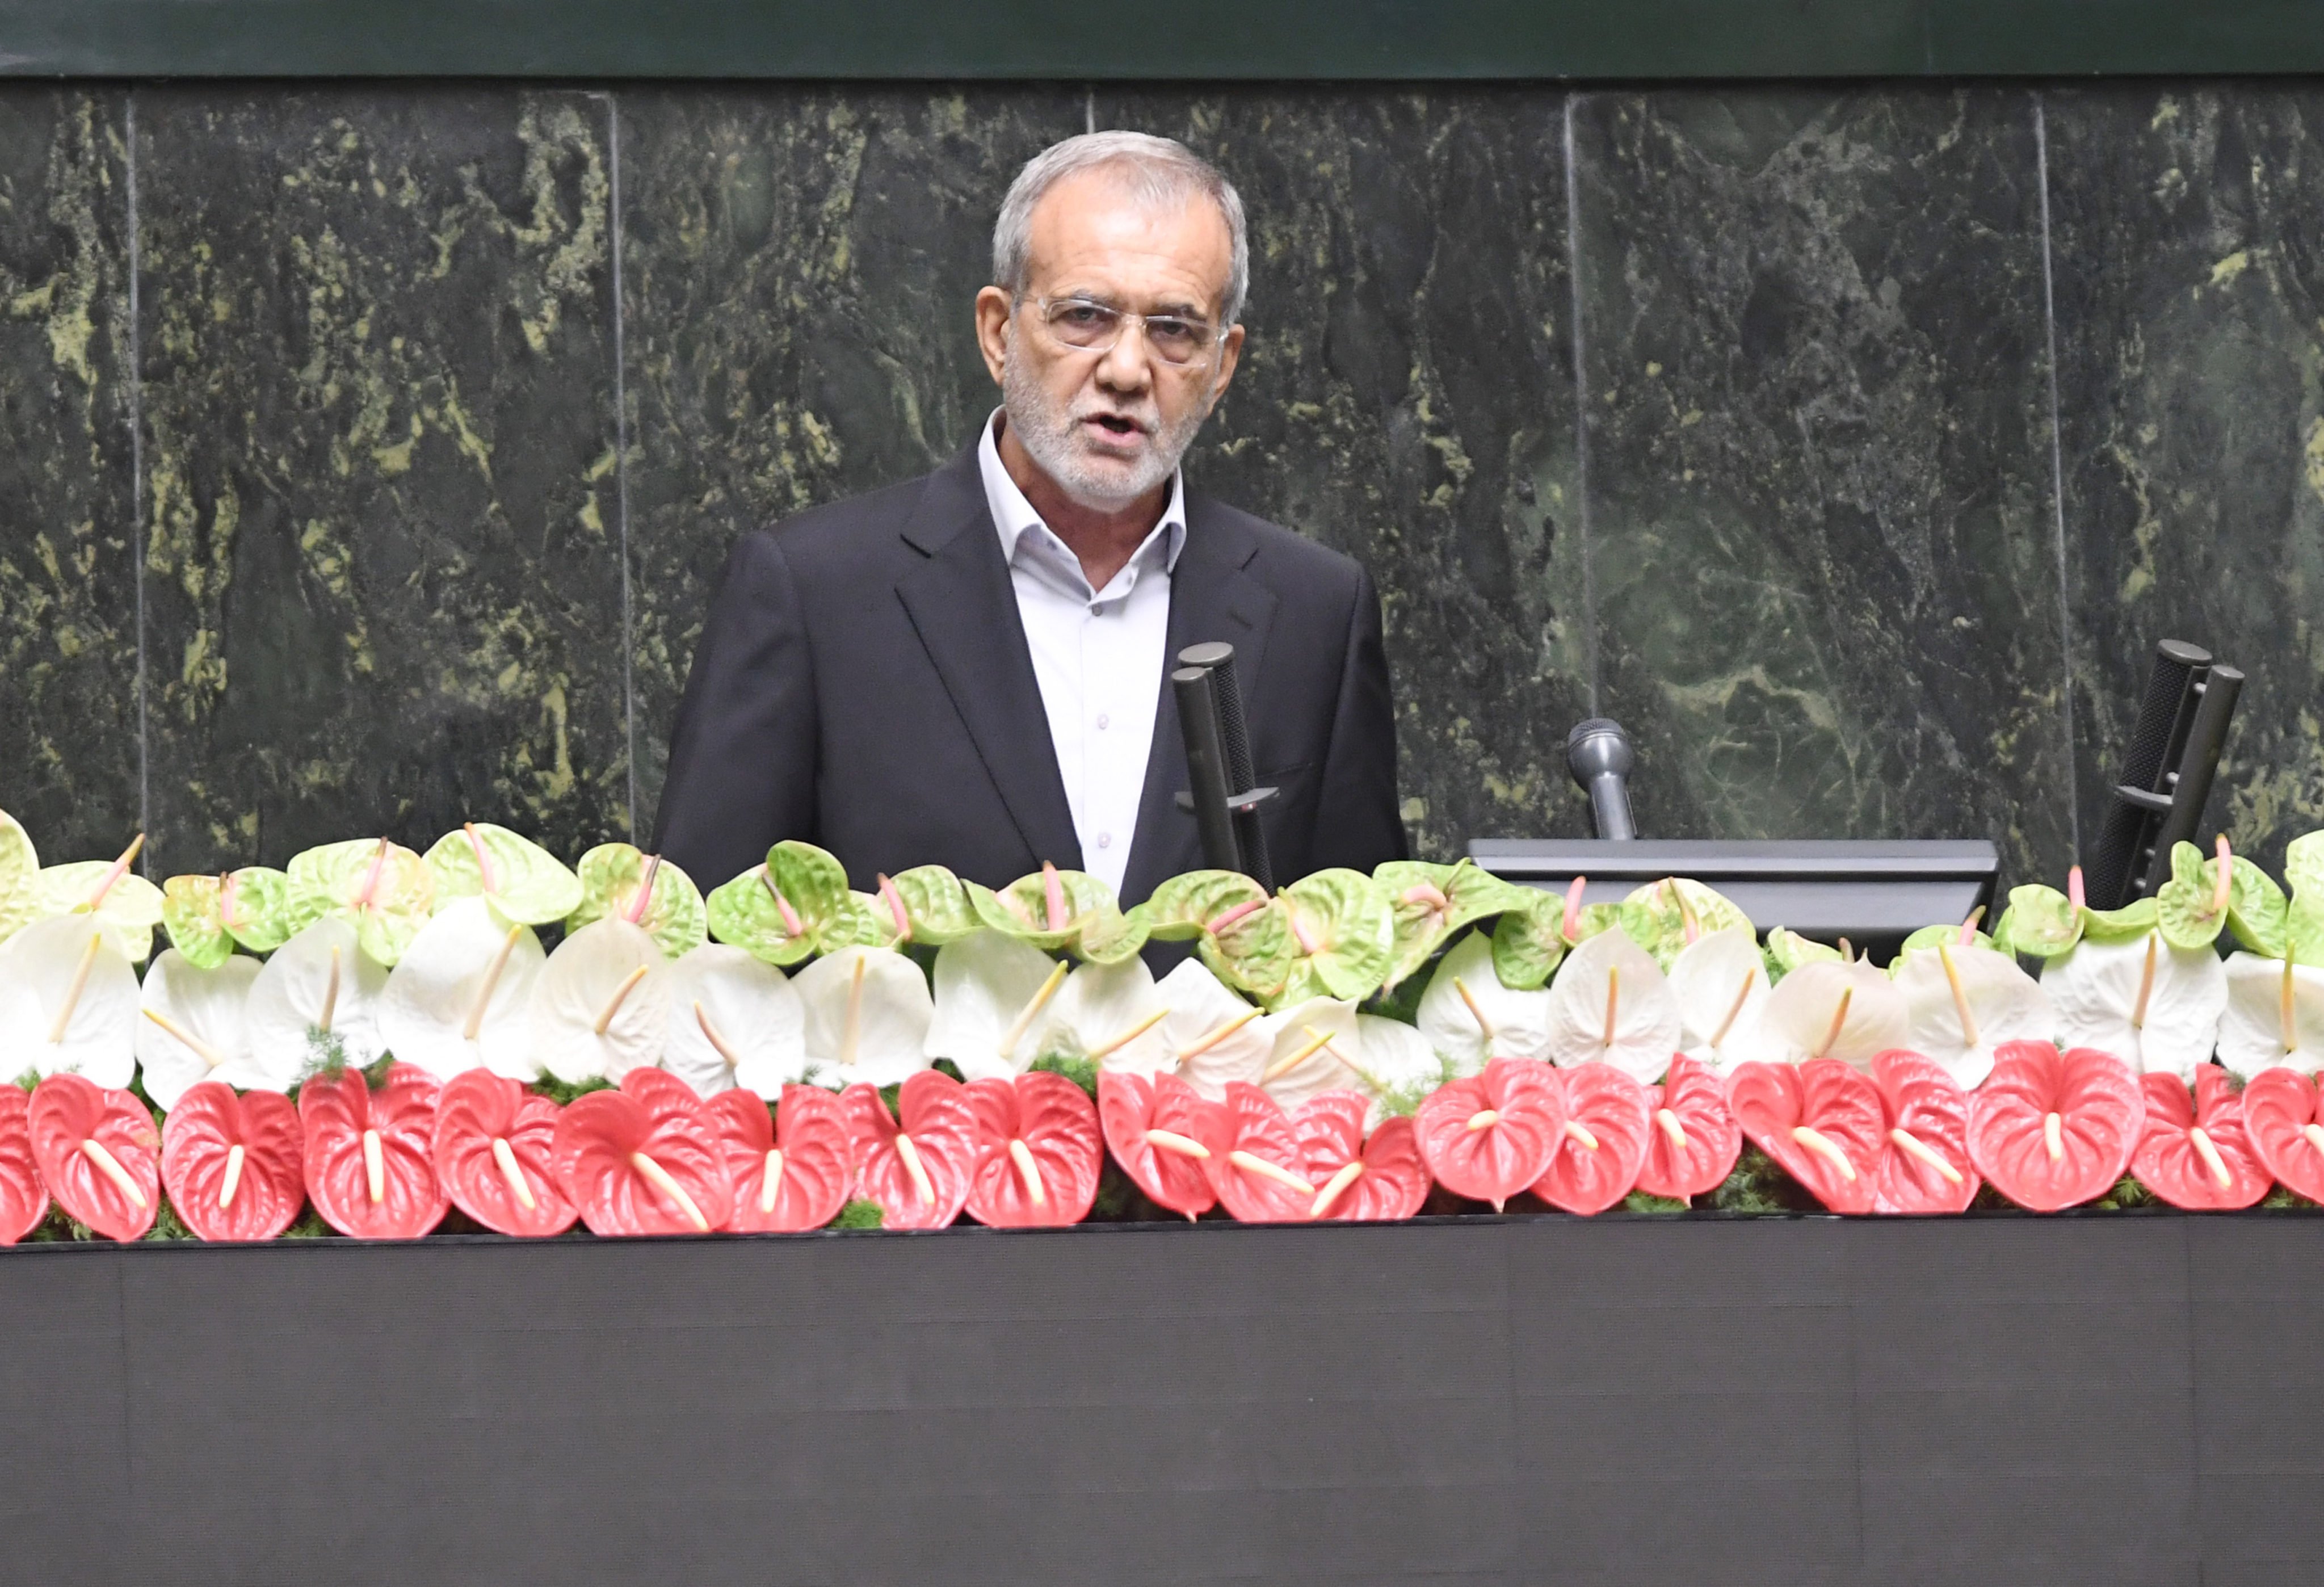 Masoud Pezeshkian delivers his inaugural address after being sworn in as Iran’s president. Photo: Xinhua